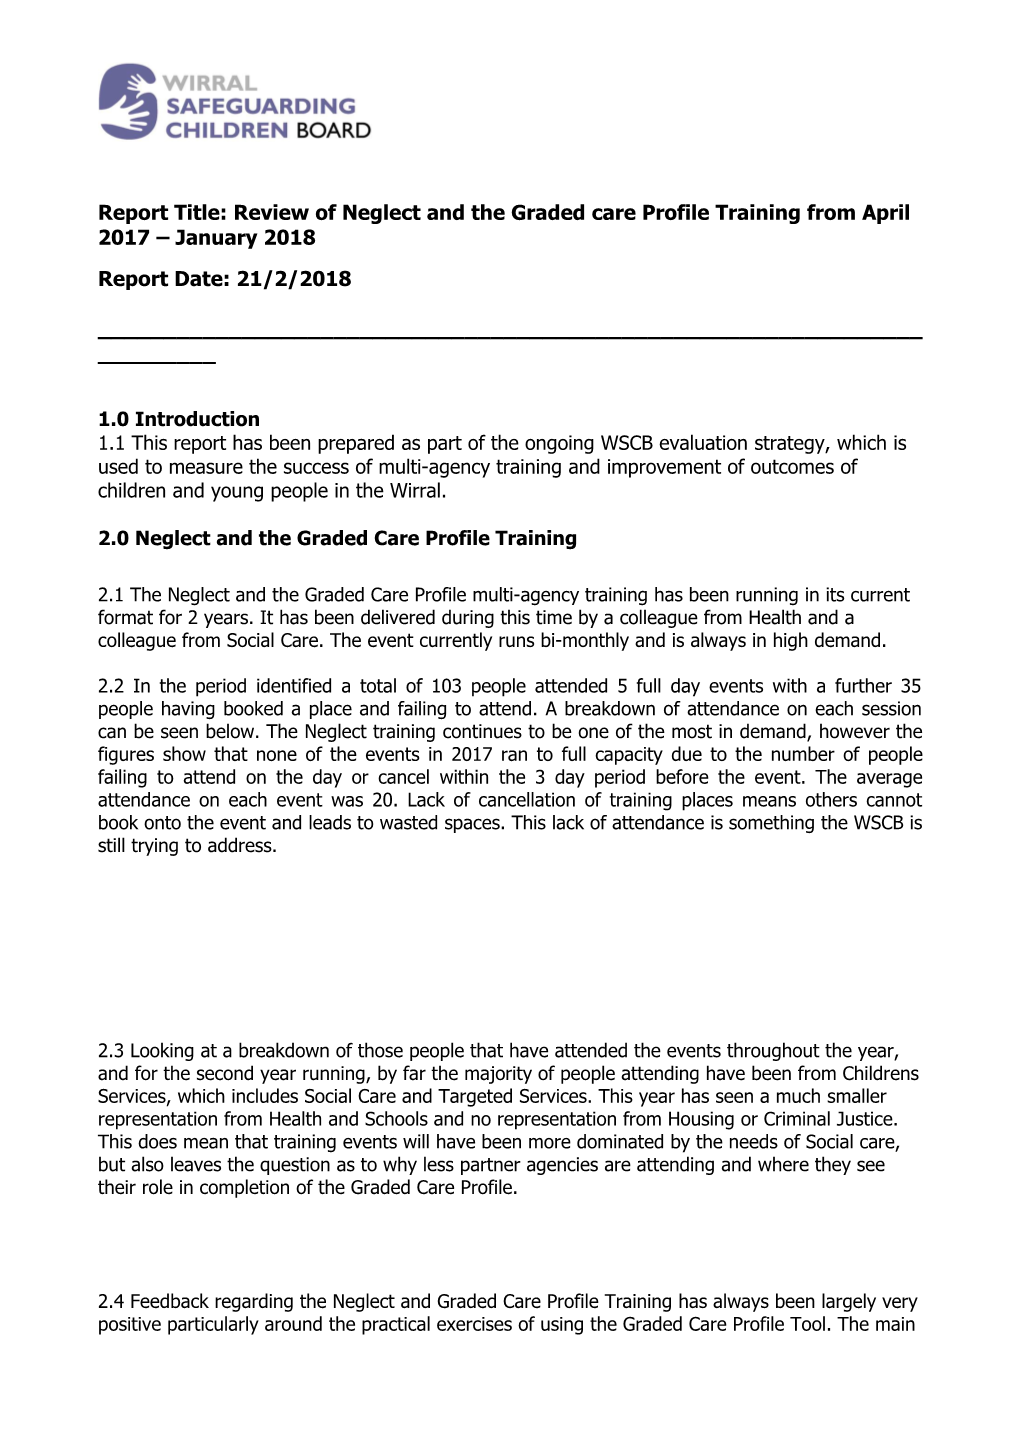 2.0Neglect and the Graded Care Profile Training